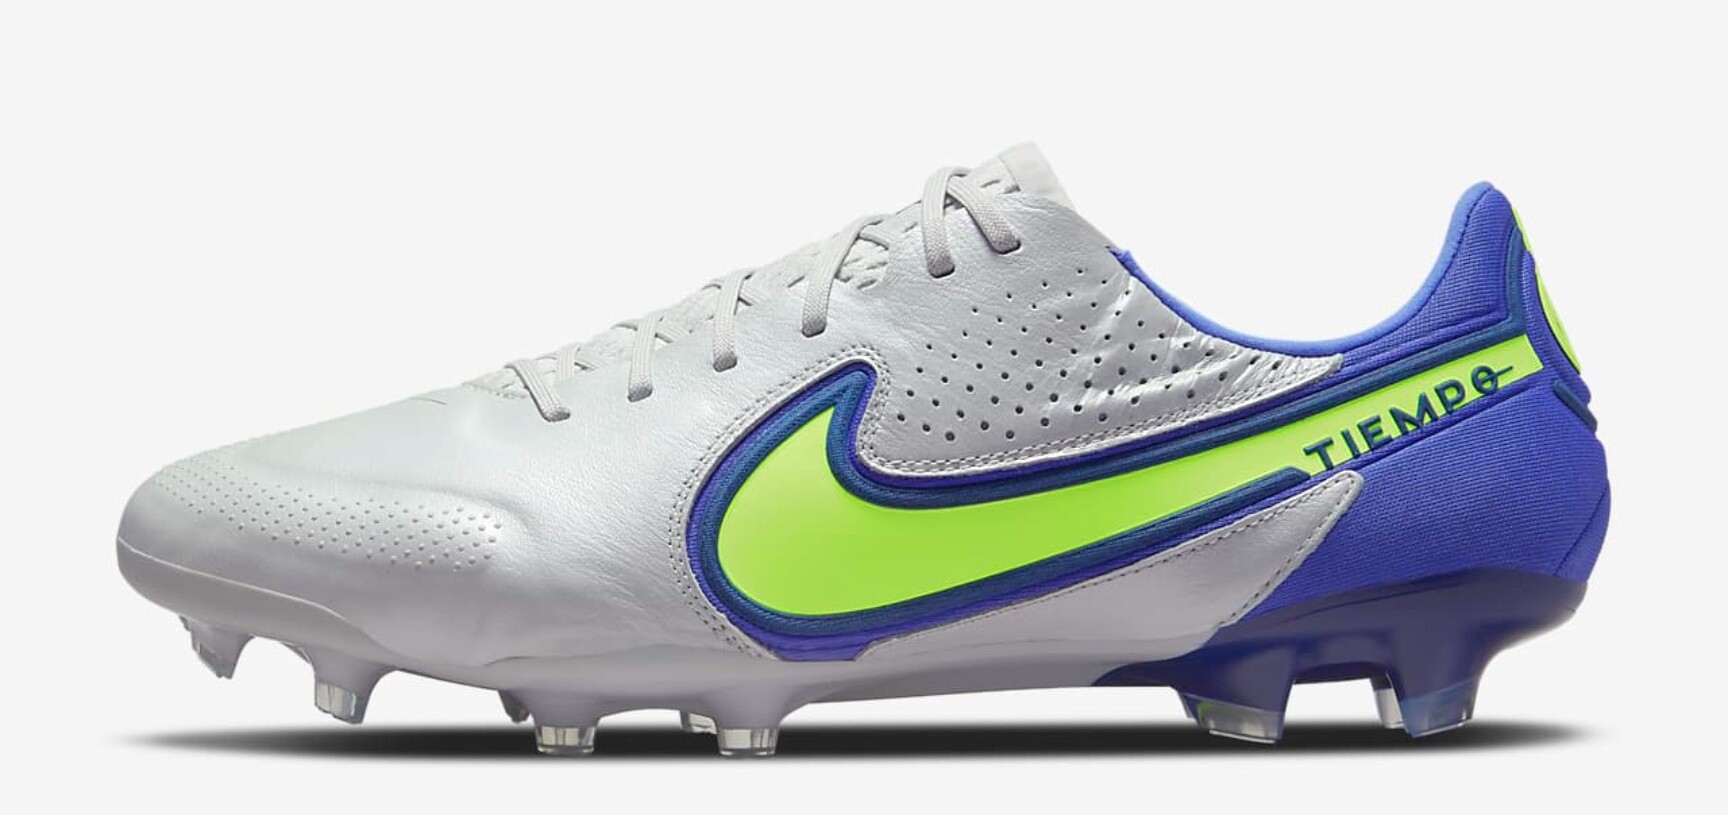 There is a trend domestic Imperative Kasper Schmeichel Football Boots